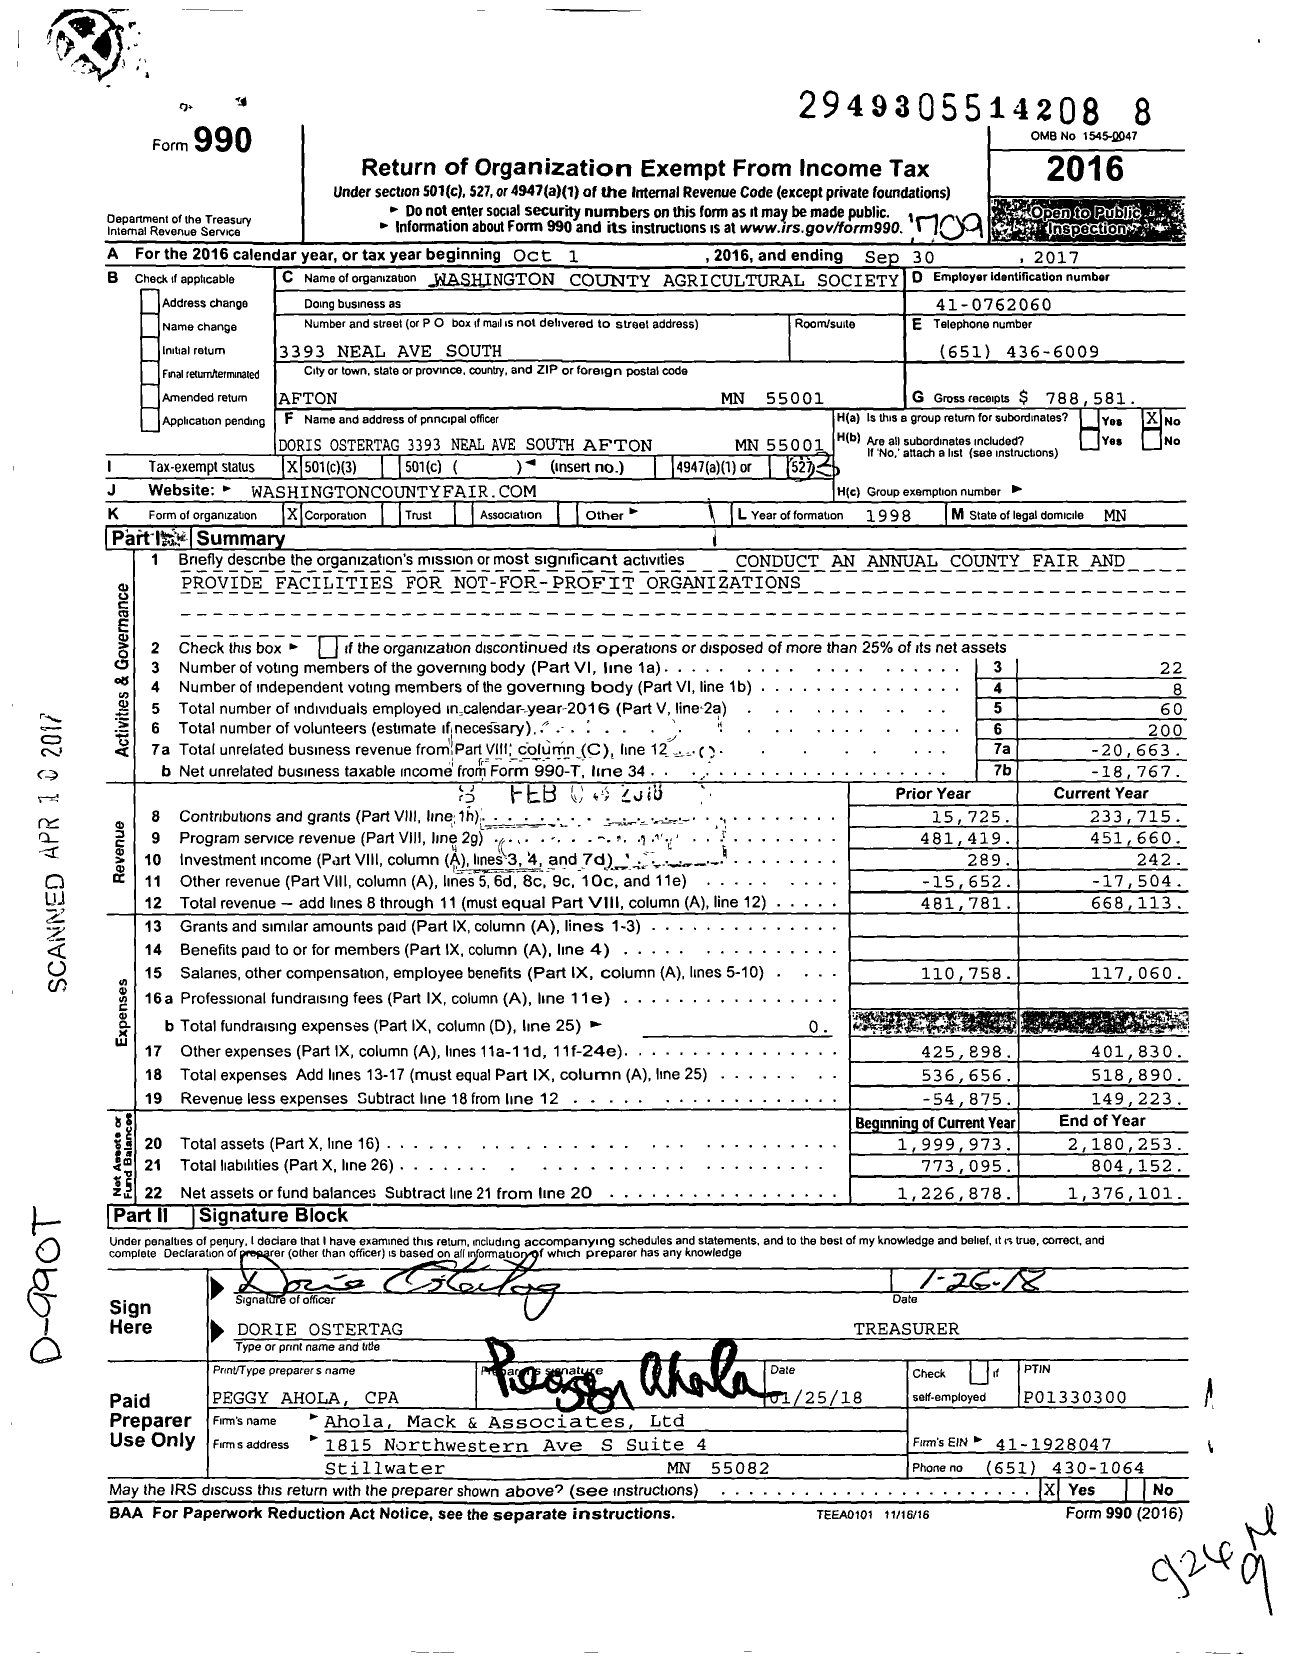 Image of first page of 2016 Form 990 for Washington County Agricultural Society